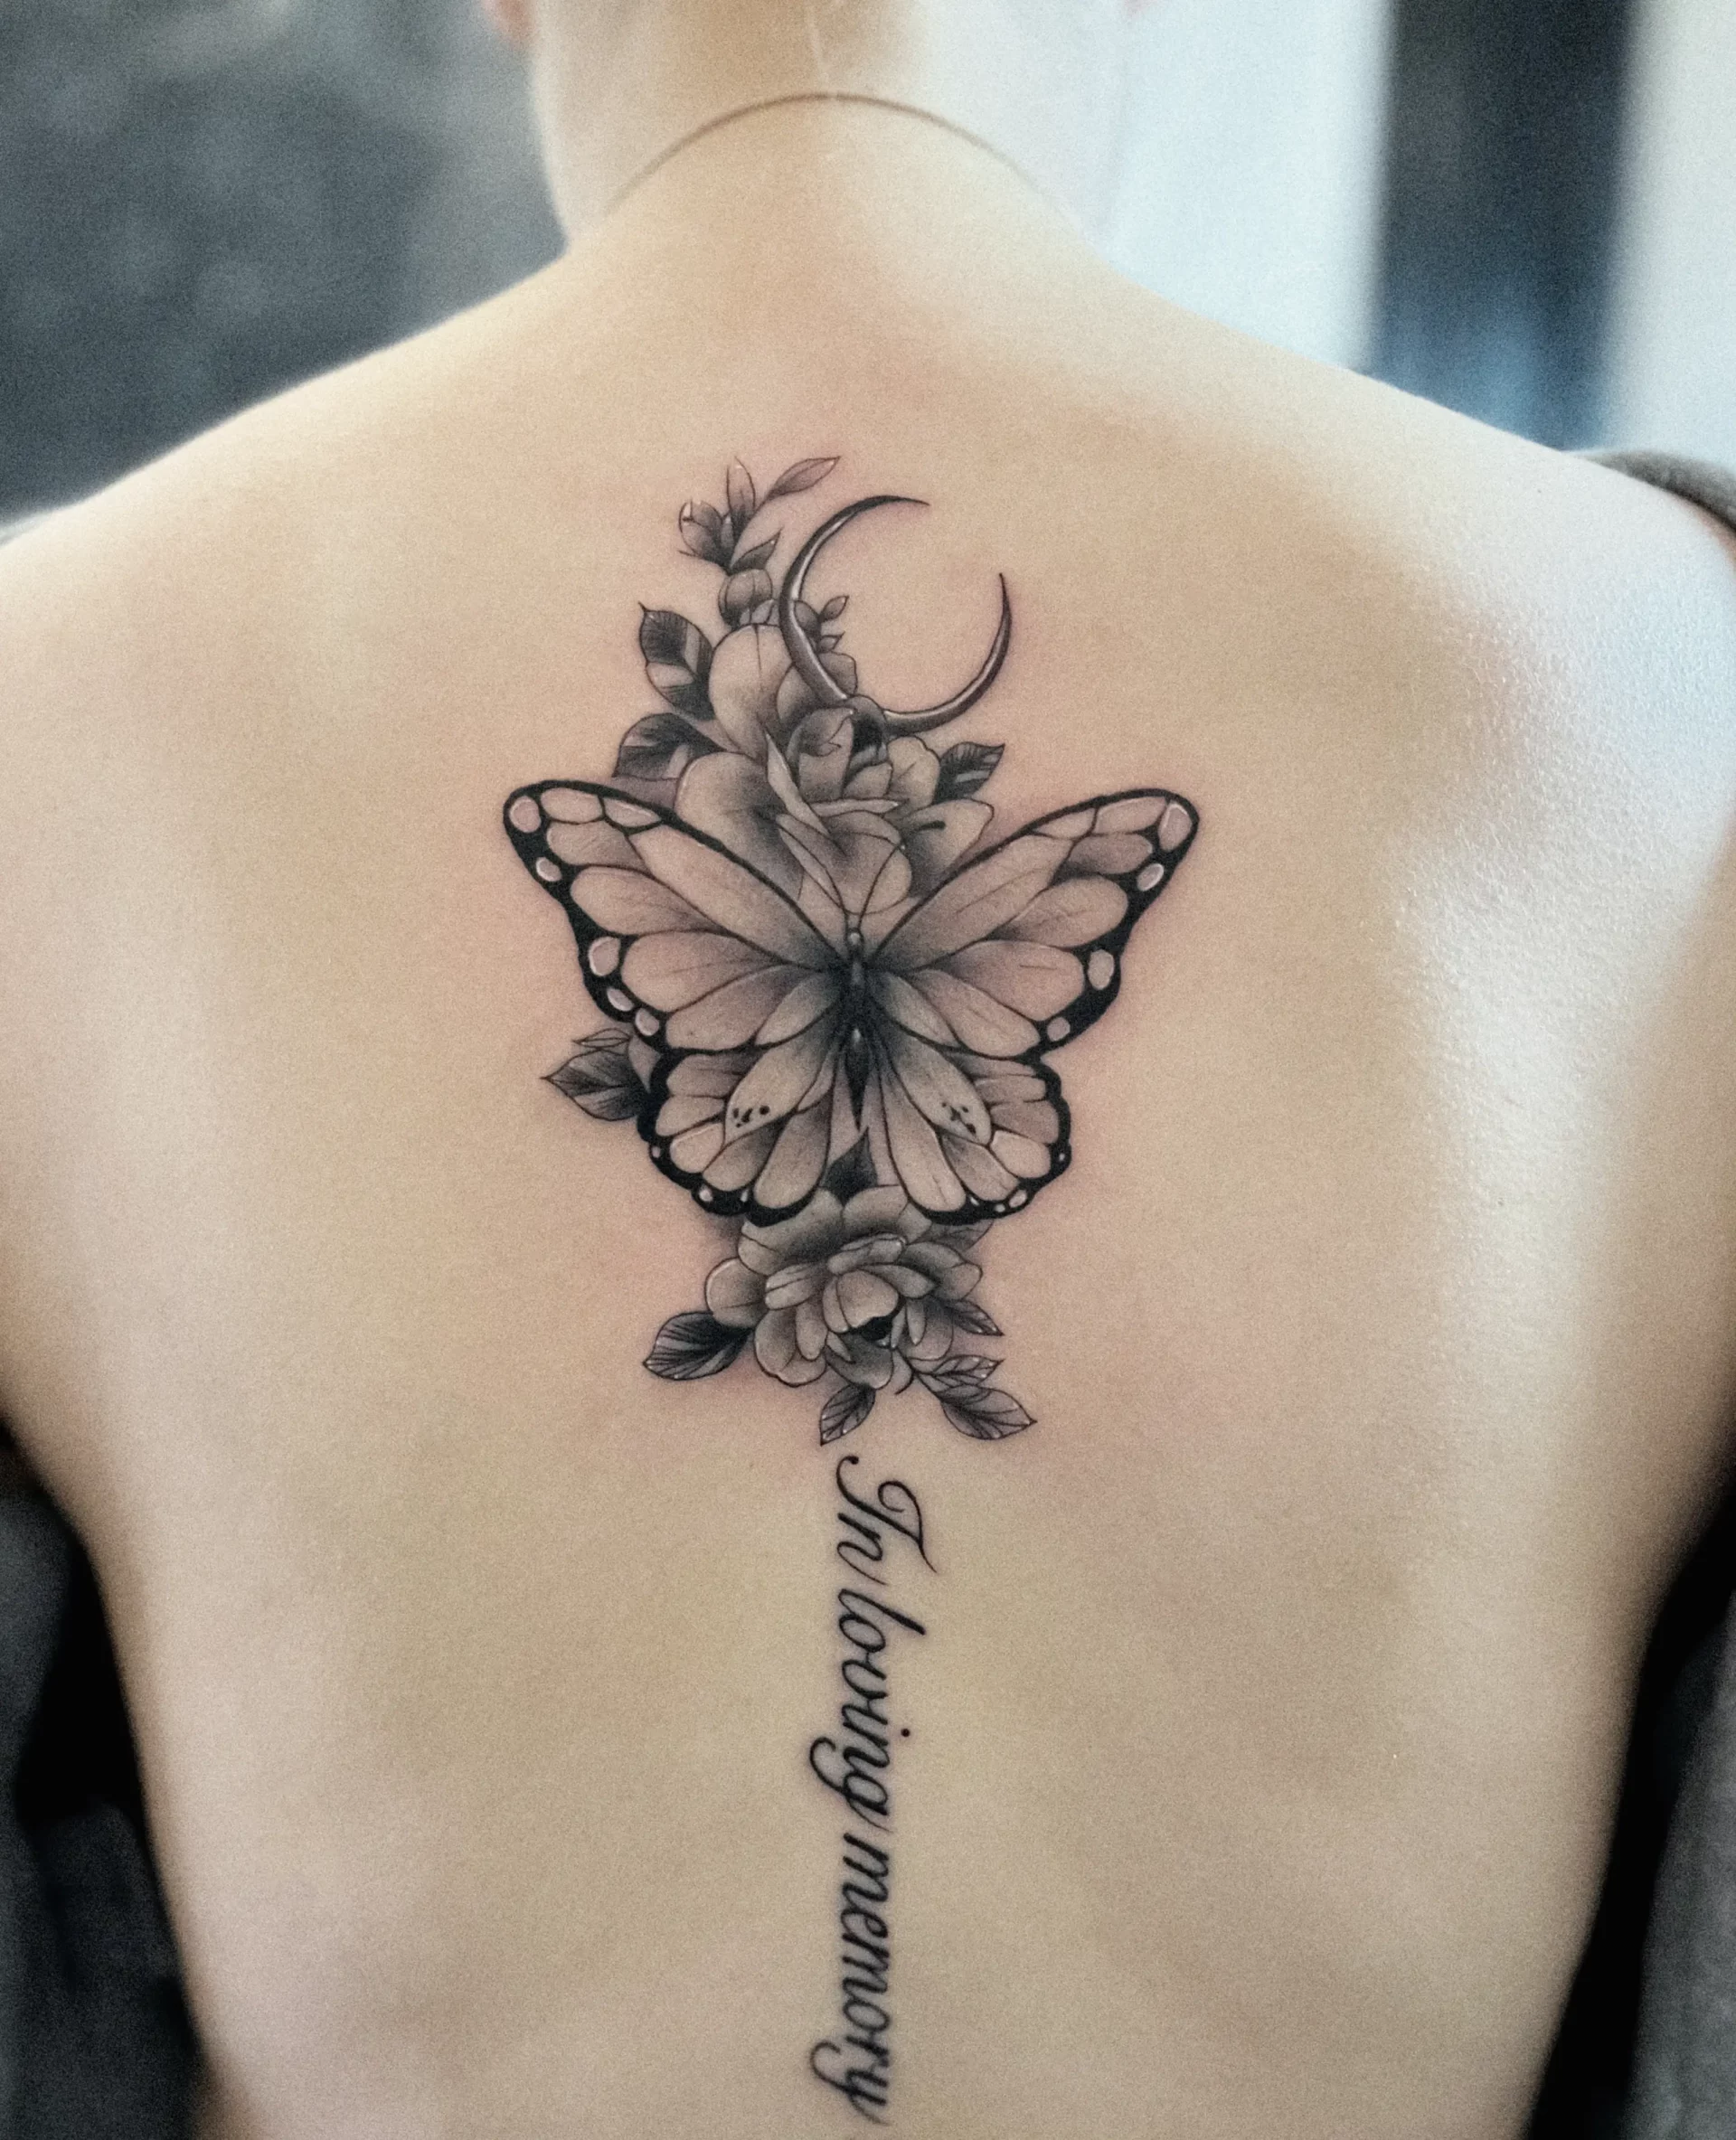 A woman's back with a black butterfly memory tattoo